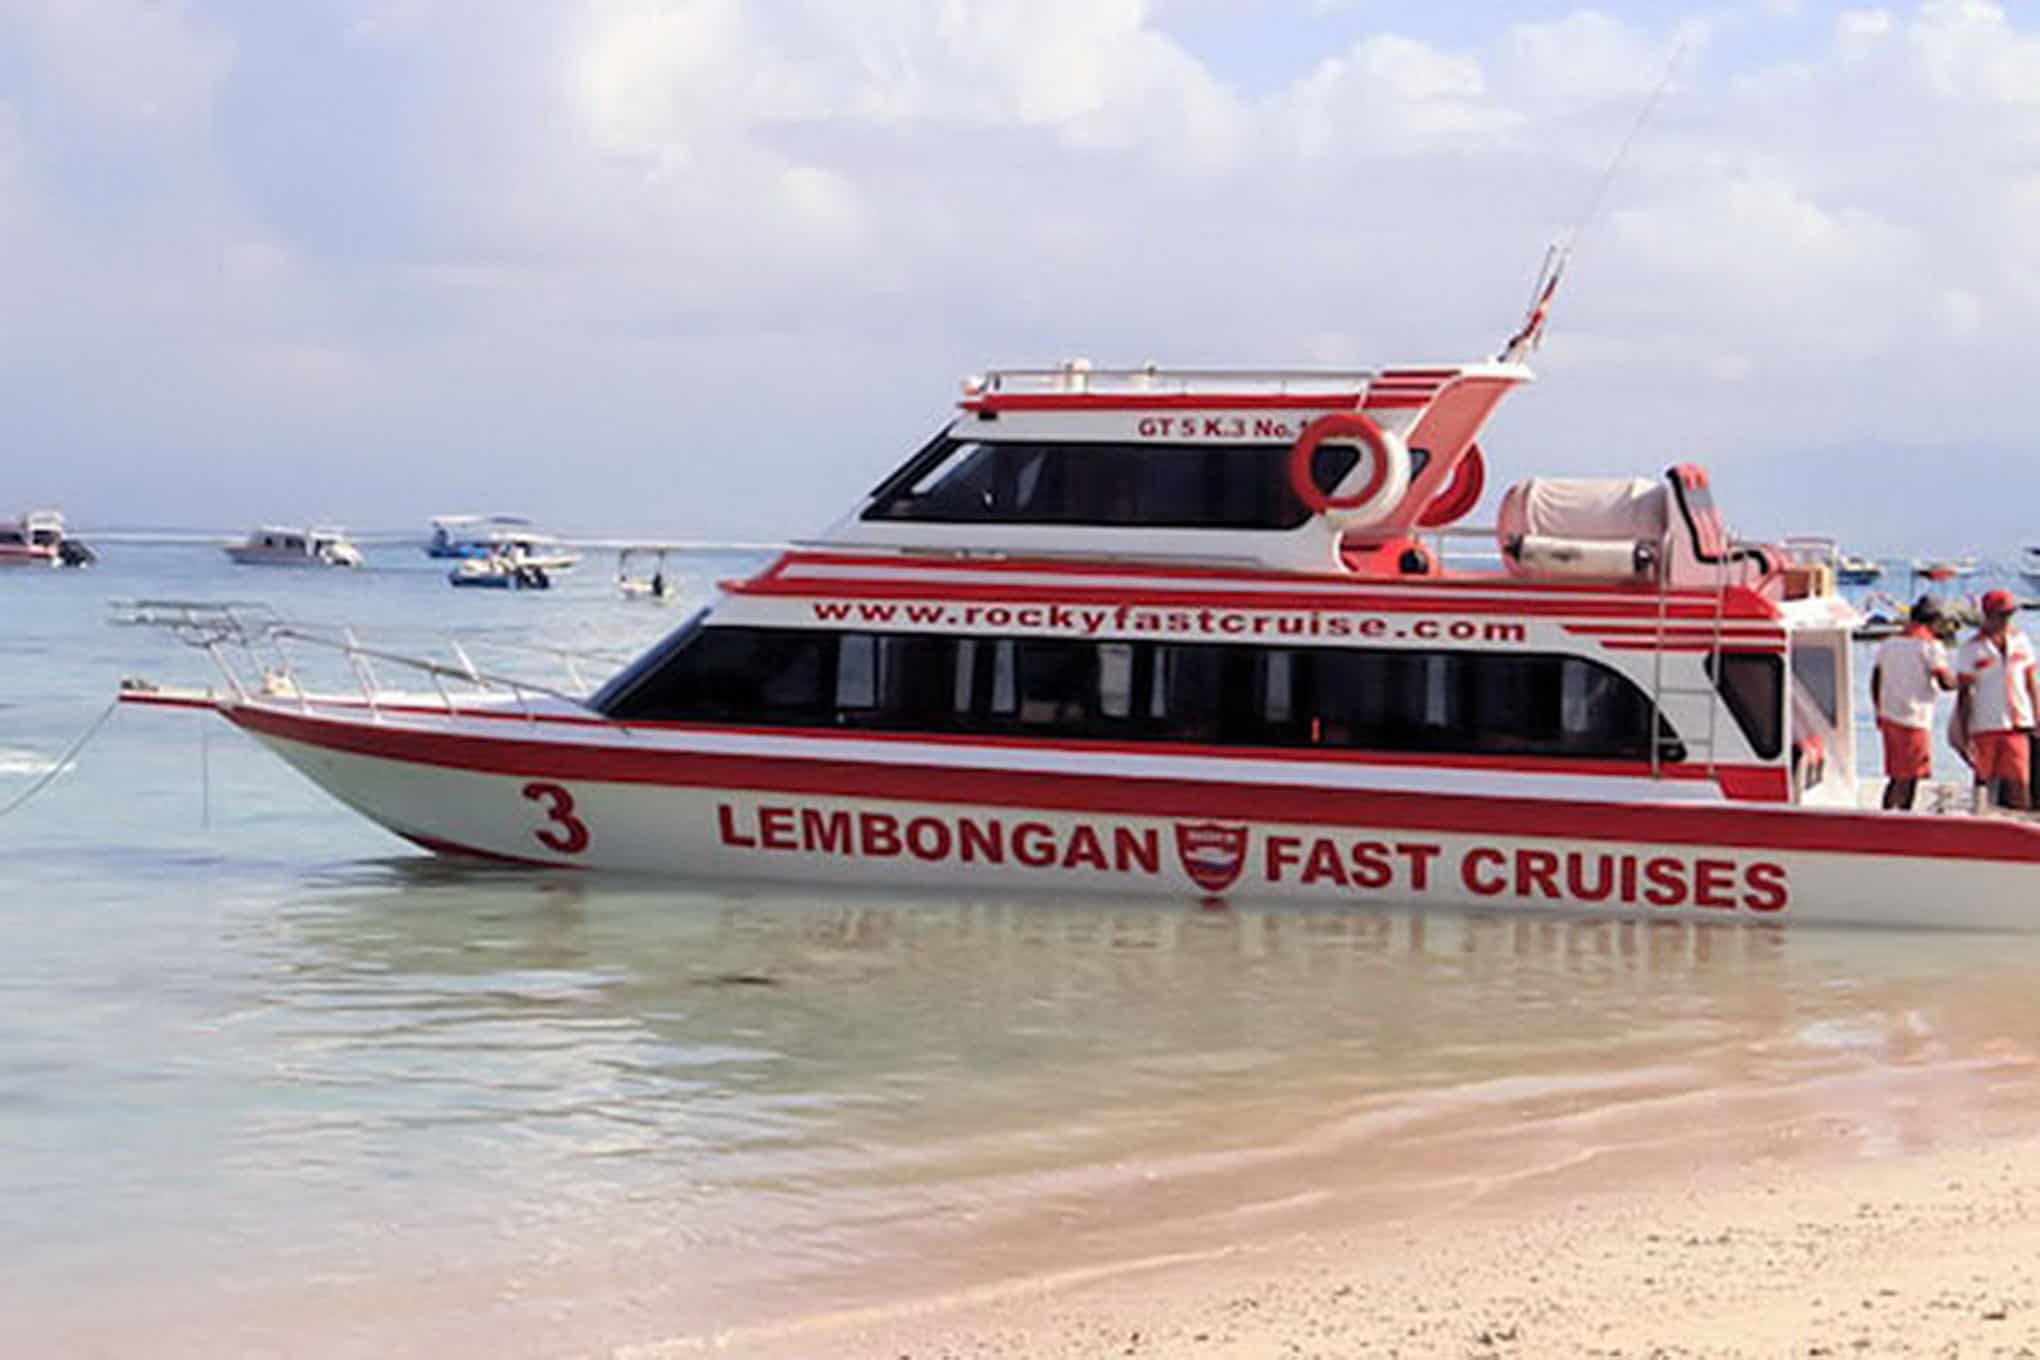 seeingbali-rocky_fast_cruise_boat_service-25